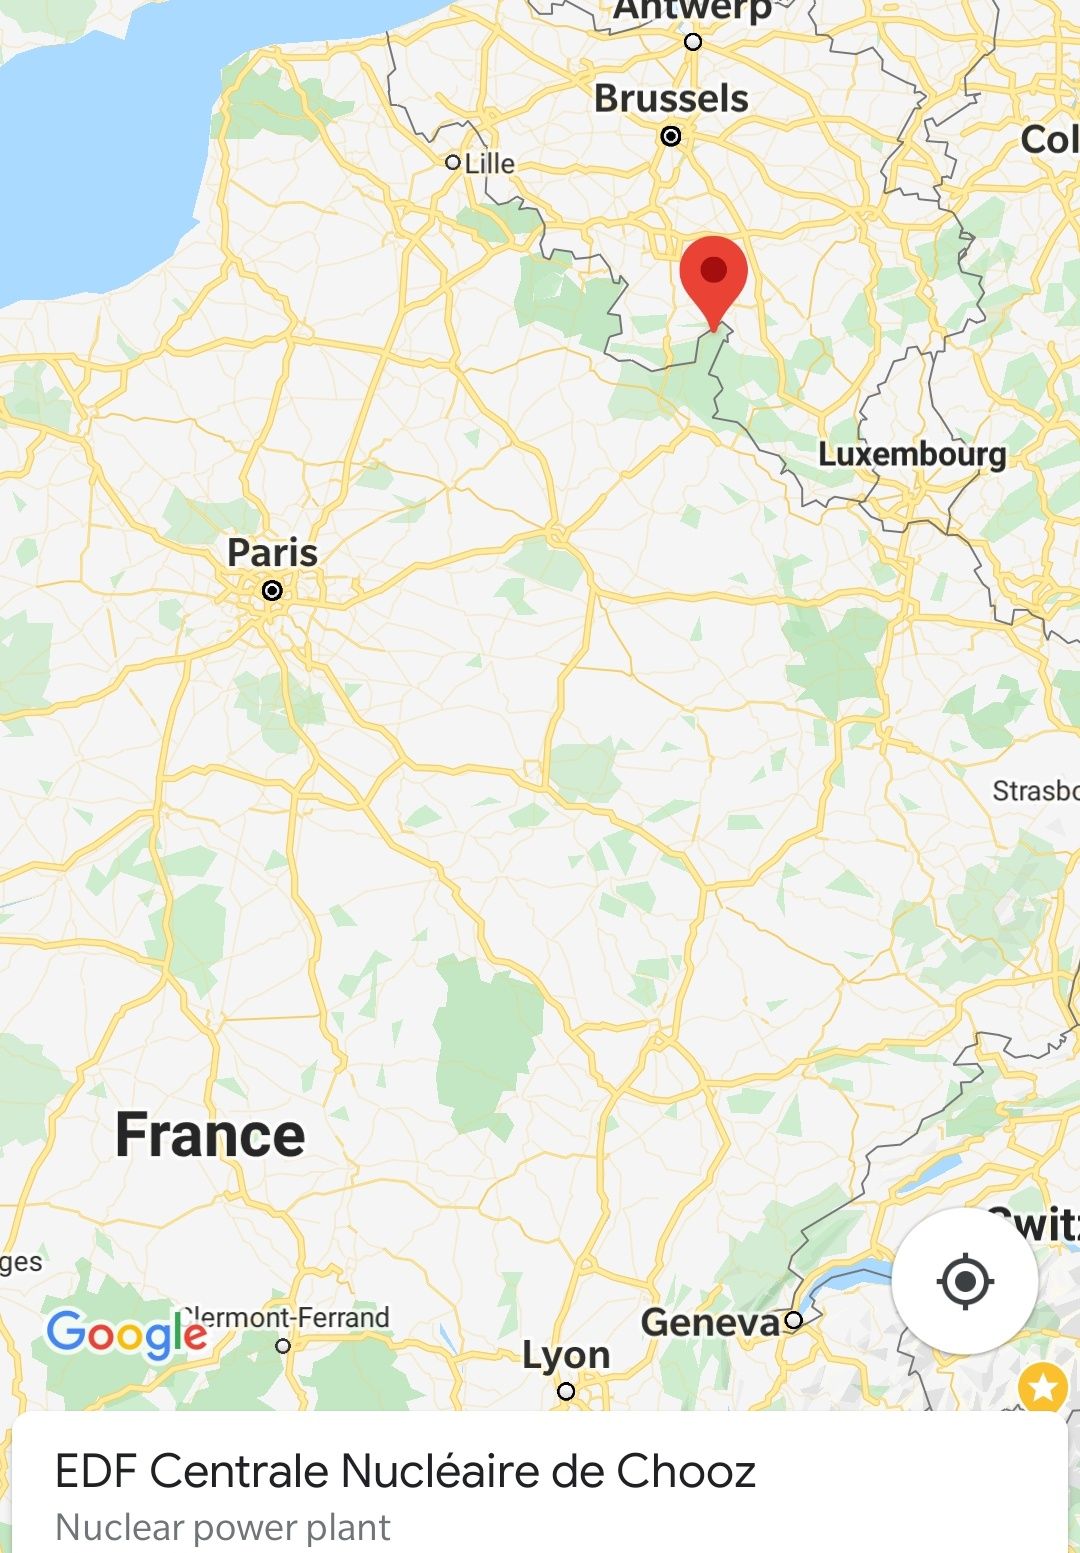 Where France chooses to put a nuclear power plant.